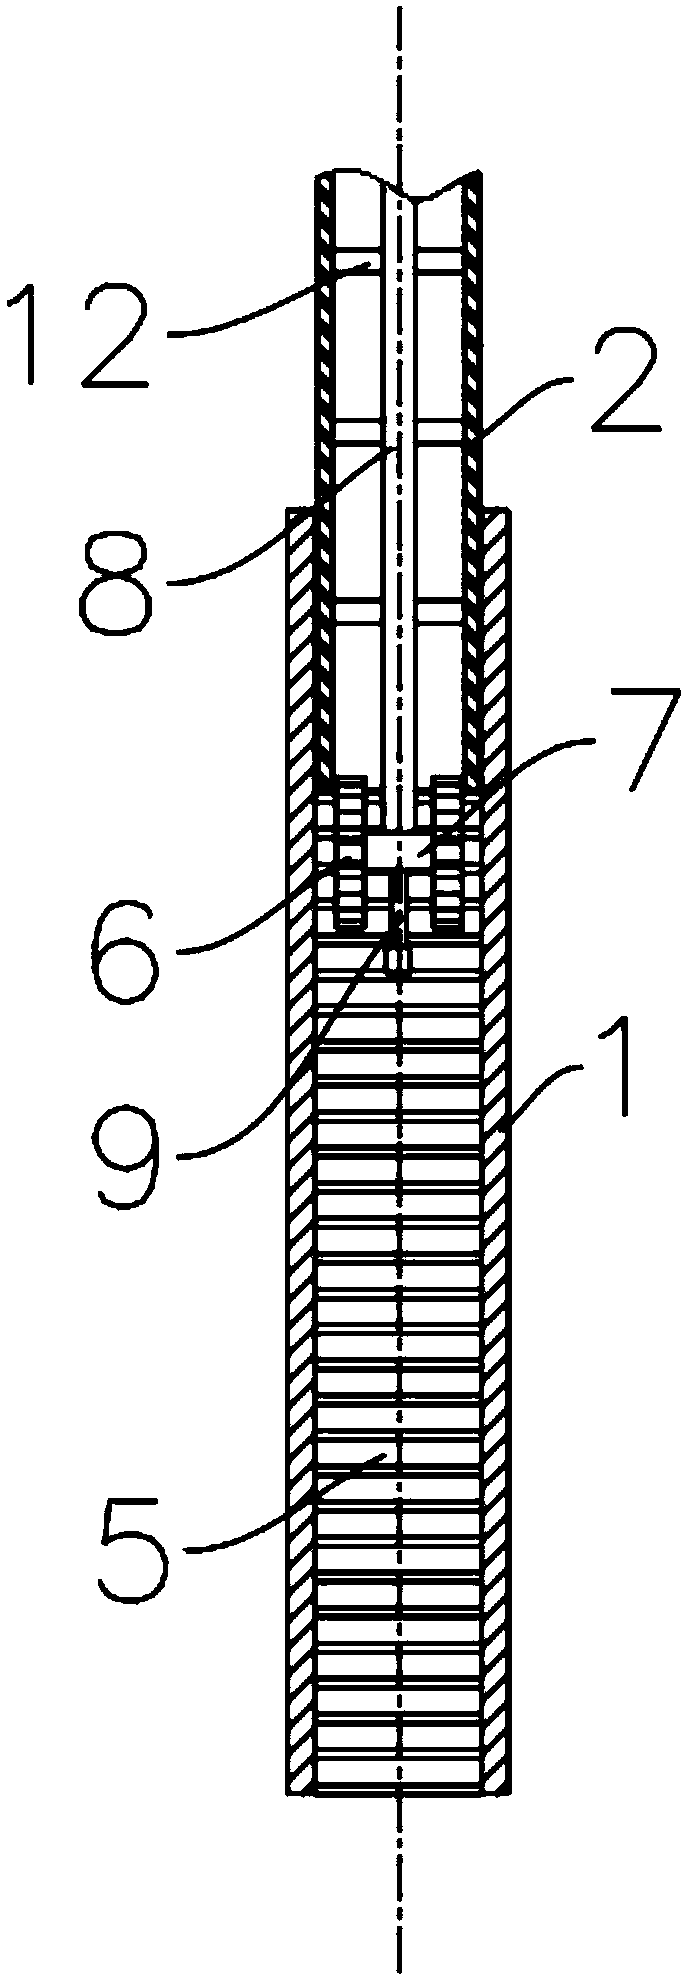 Suitcase pull bar capable of optionally adjusting length